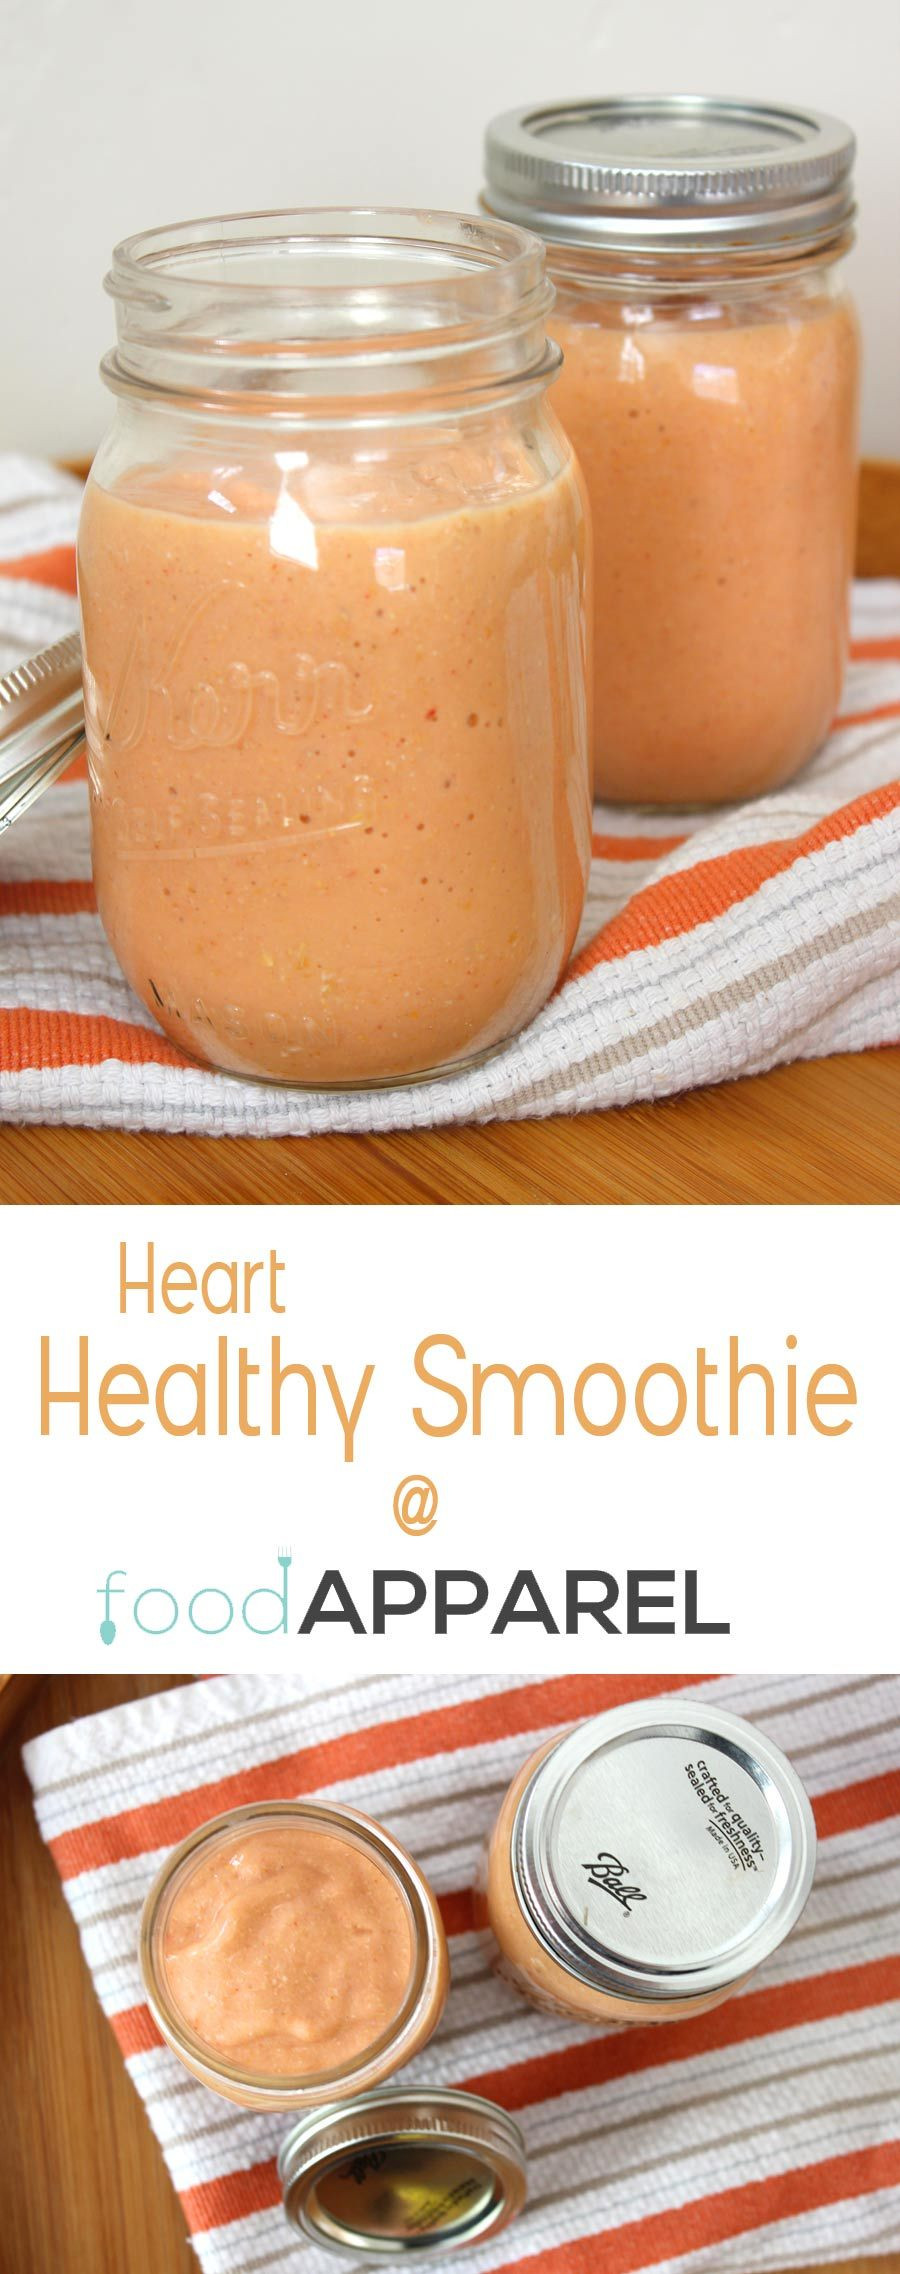 Heart Healthy Smoothie Recipes Heart Healthy Smoothie Recipe